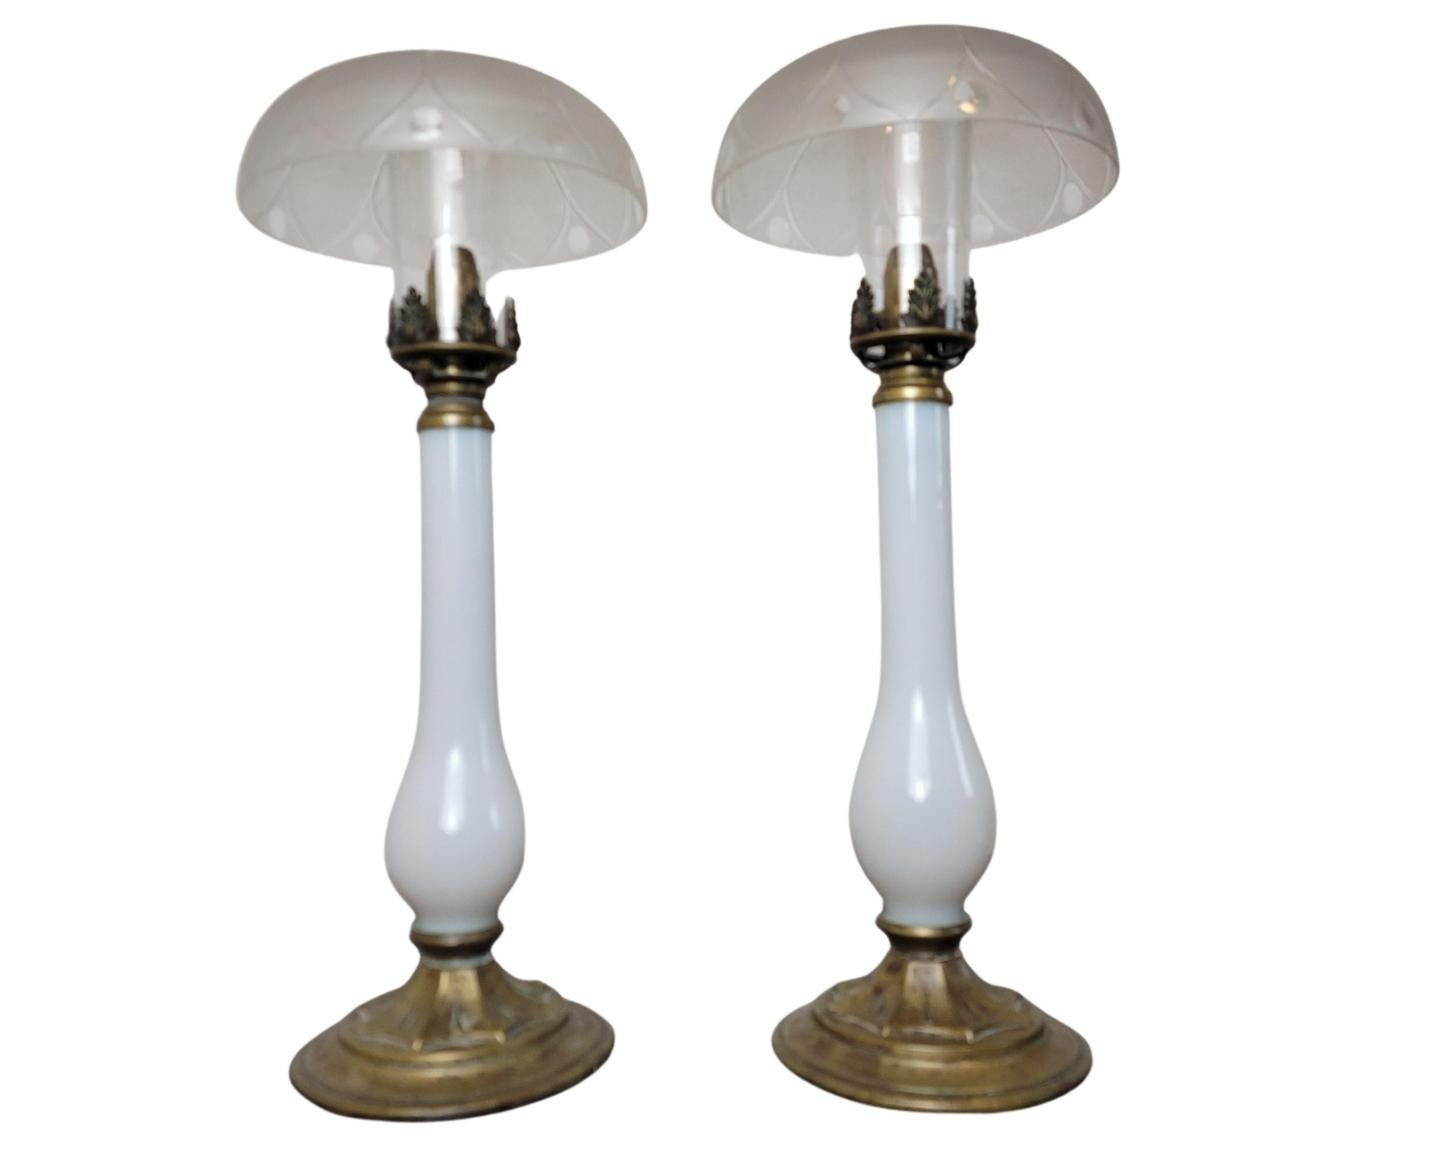 Scarce French Empire Period Opaline Glass Brass Candlestick Table Lamp Pair For Sale 15